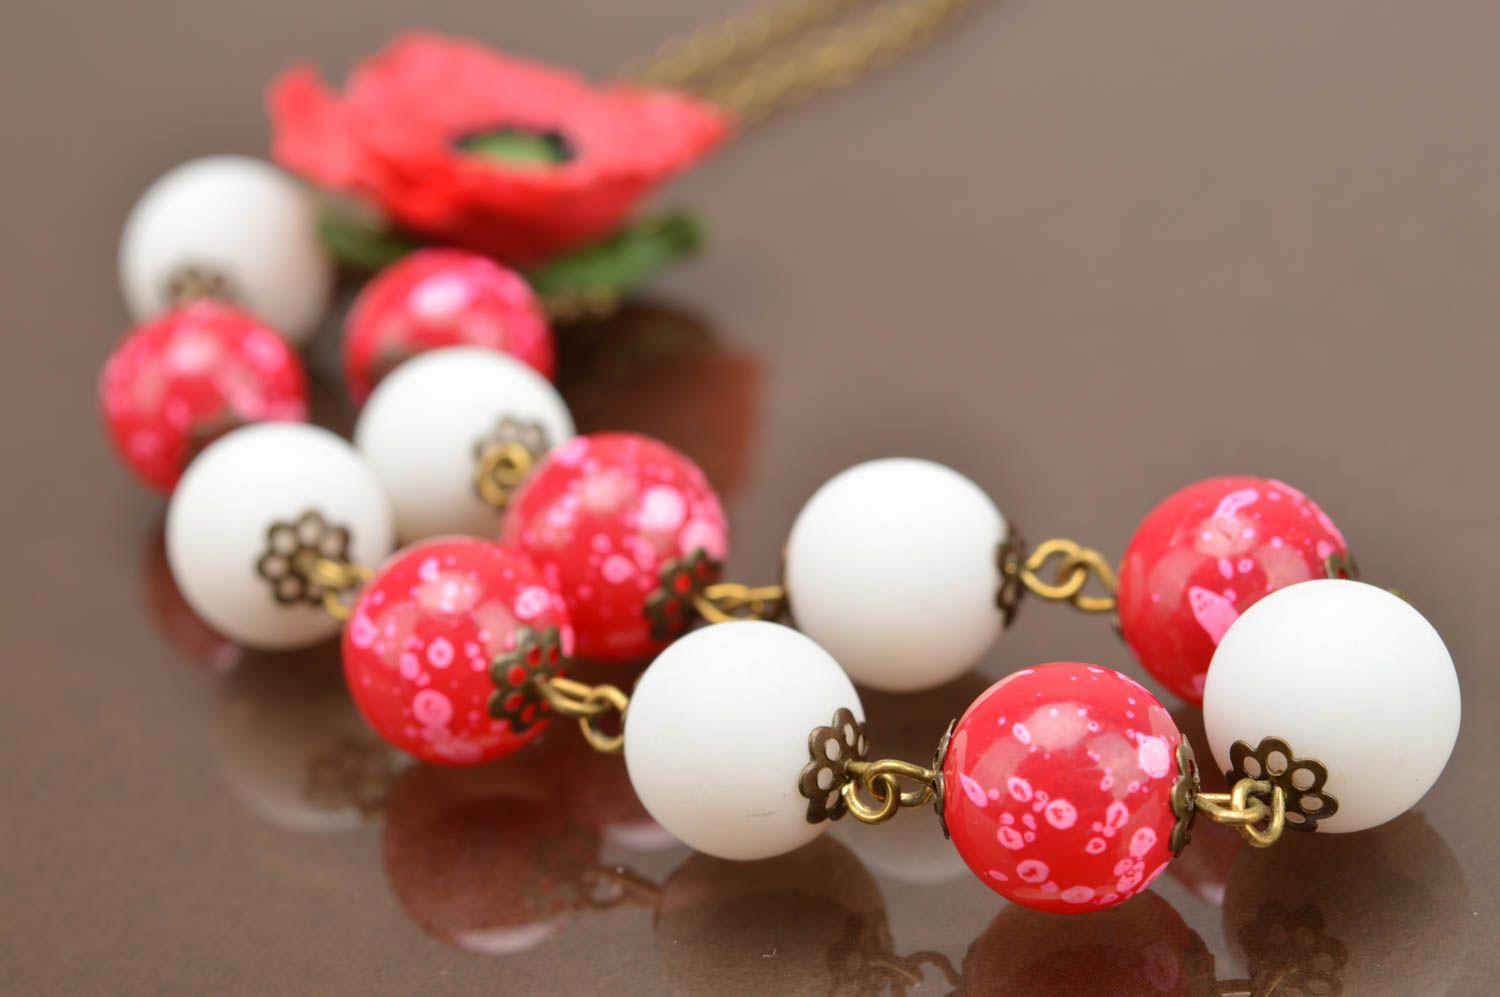 Handmade floral polymer clay jewelry set earrings and necklace with red poppies photo 4